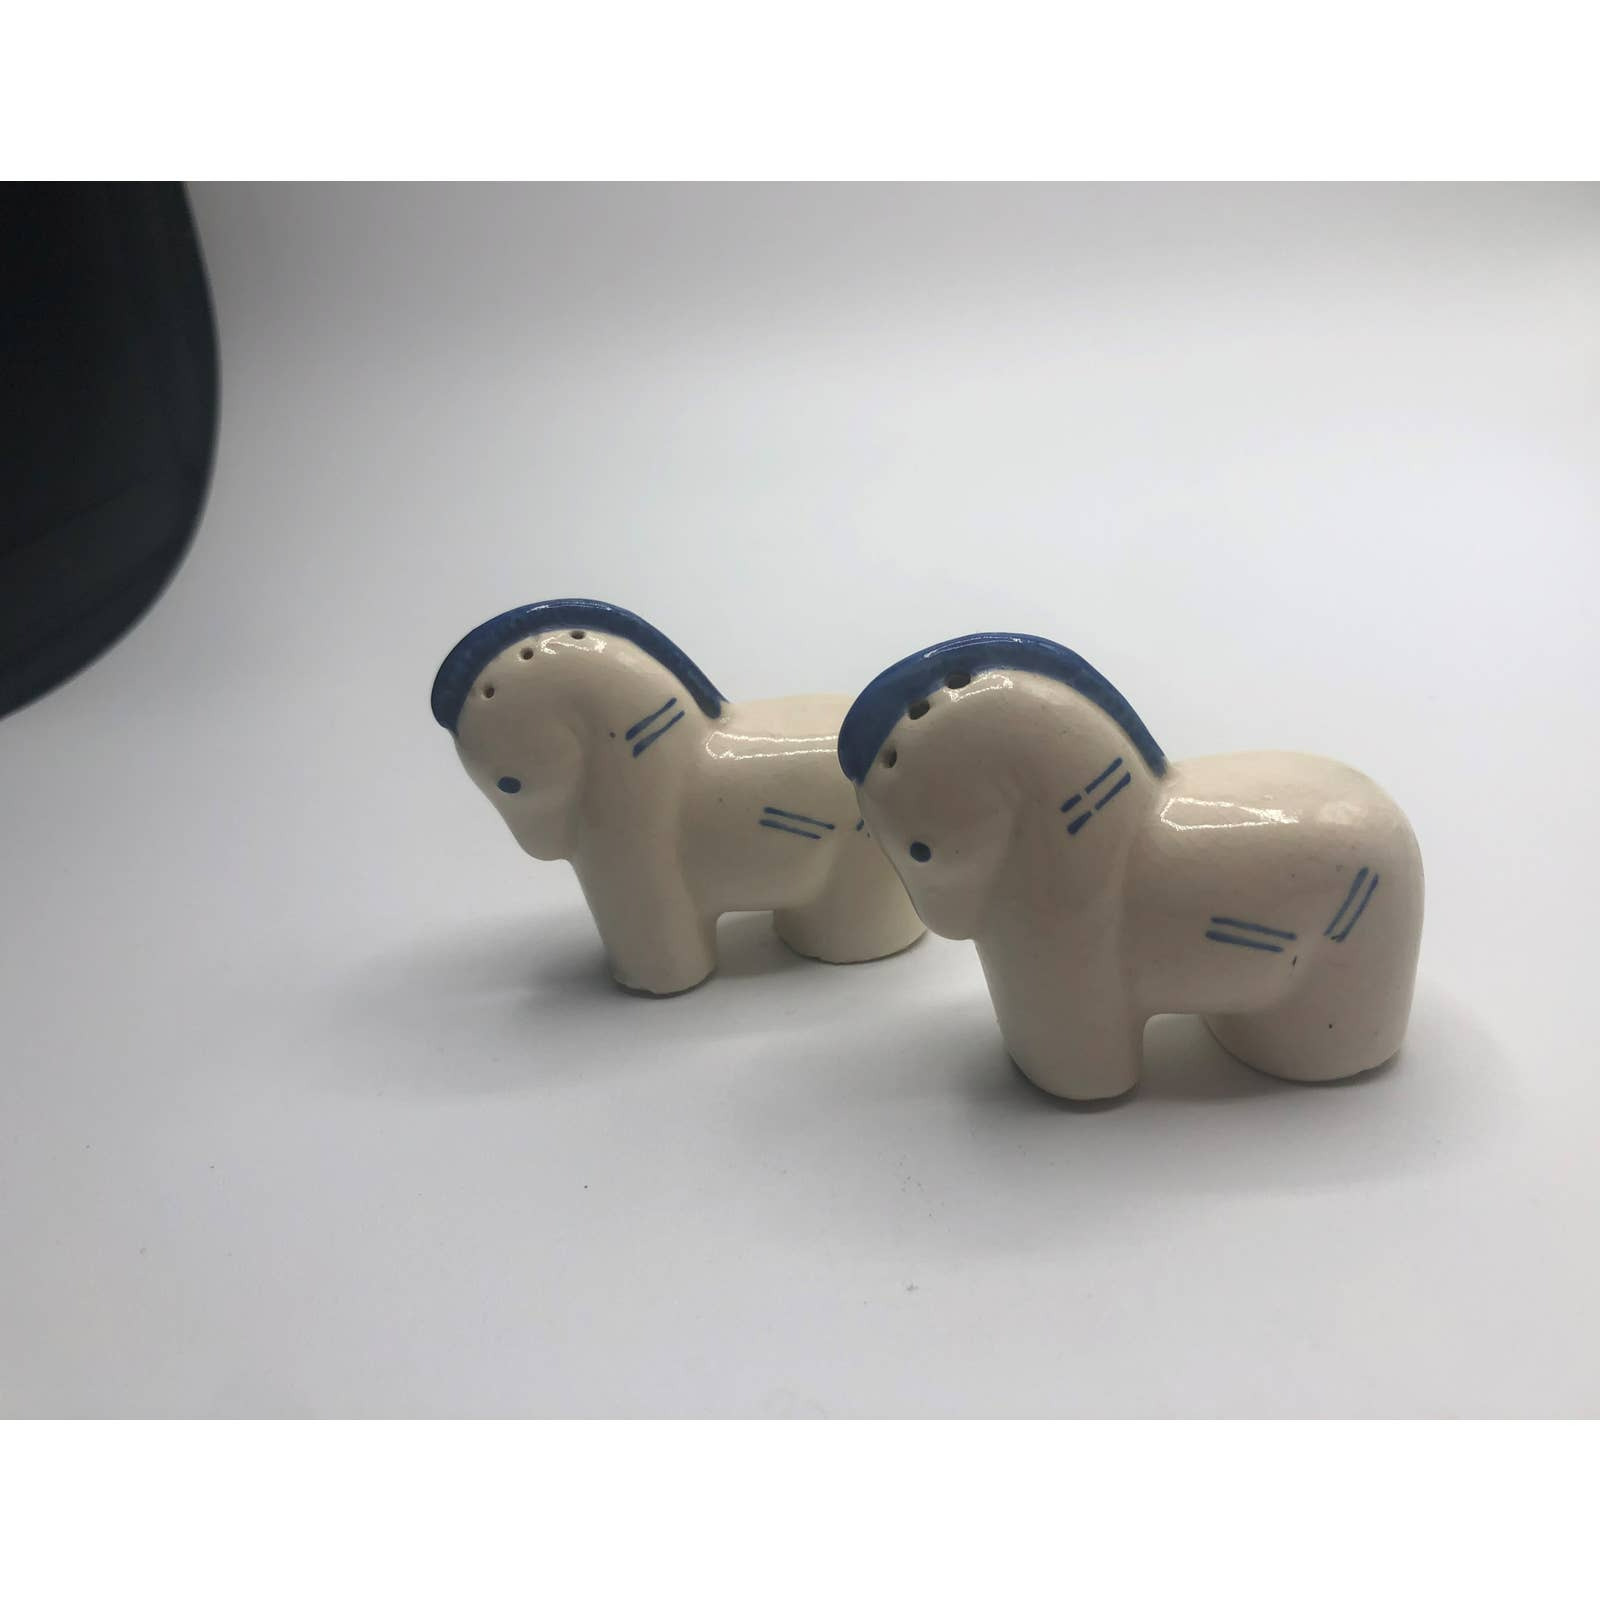 Miniature Horse Salt And Pepper Shakers White Blue